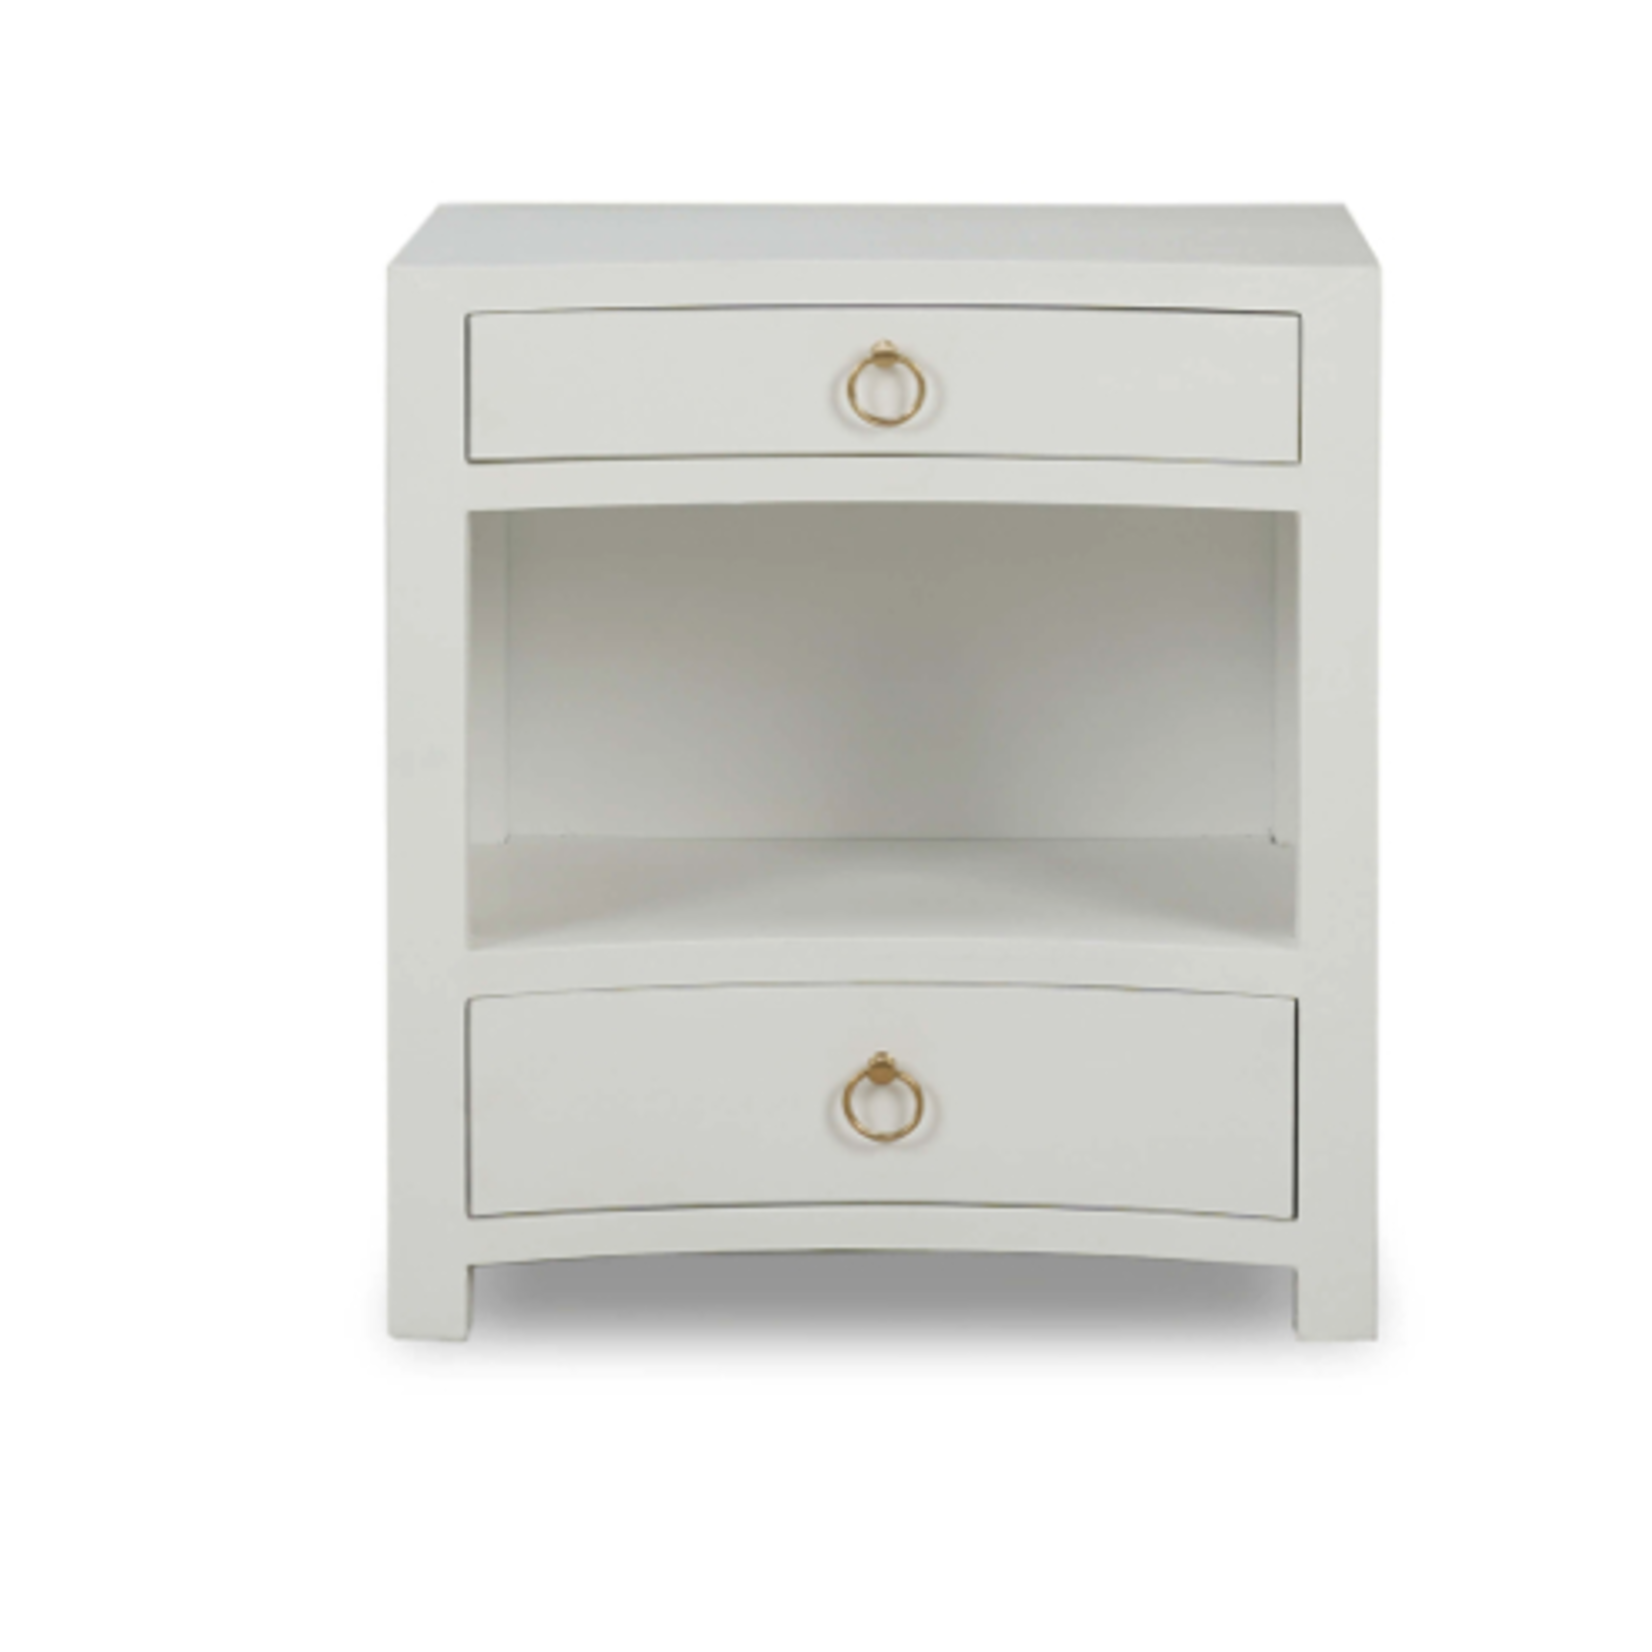 Outside The Box 25x18x28 Set Of 2 Morning White Linen Wrapped Mahogany 2 Drawer Nightstand